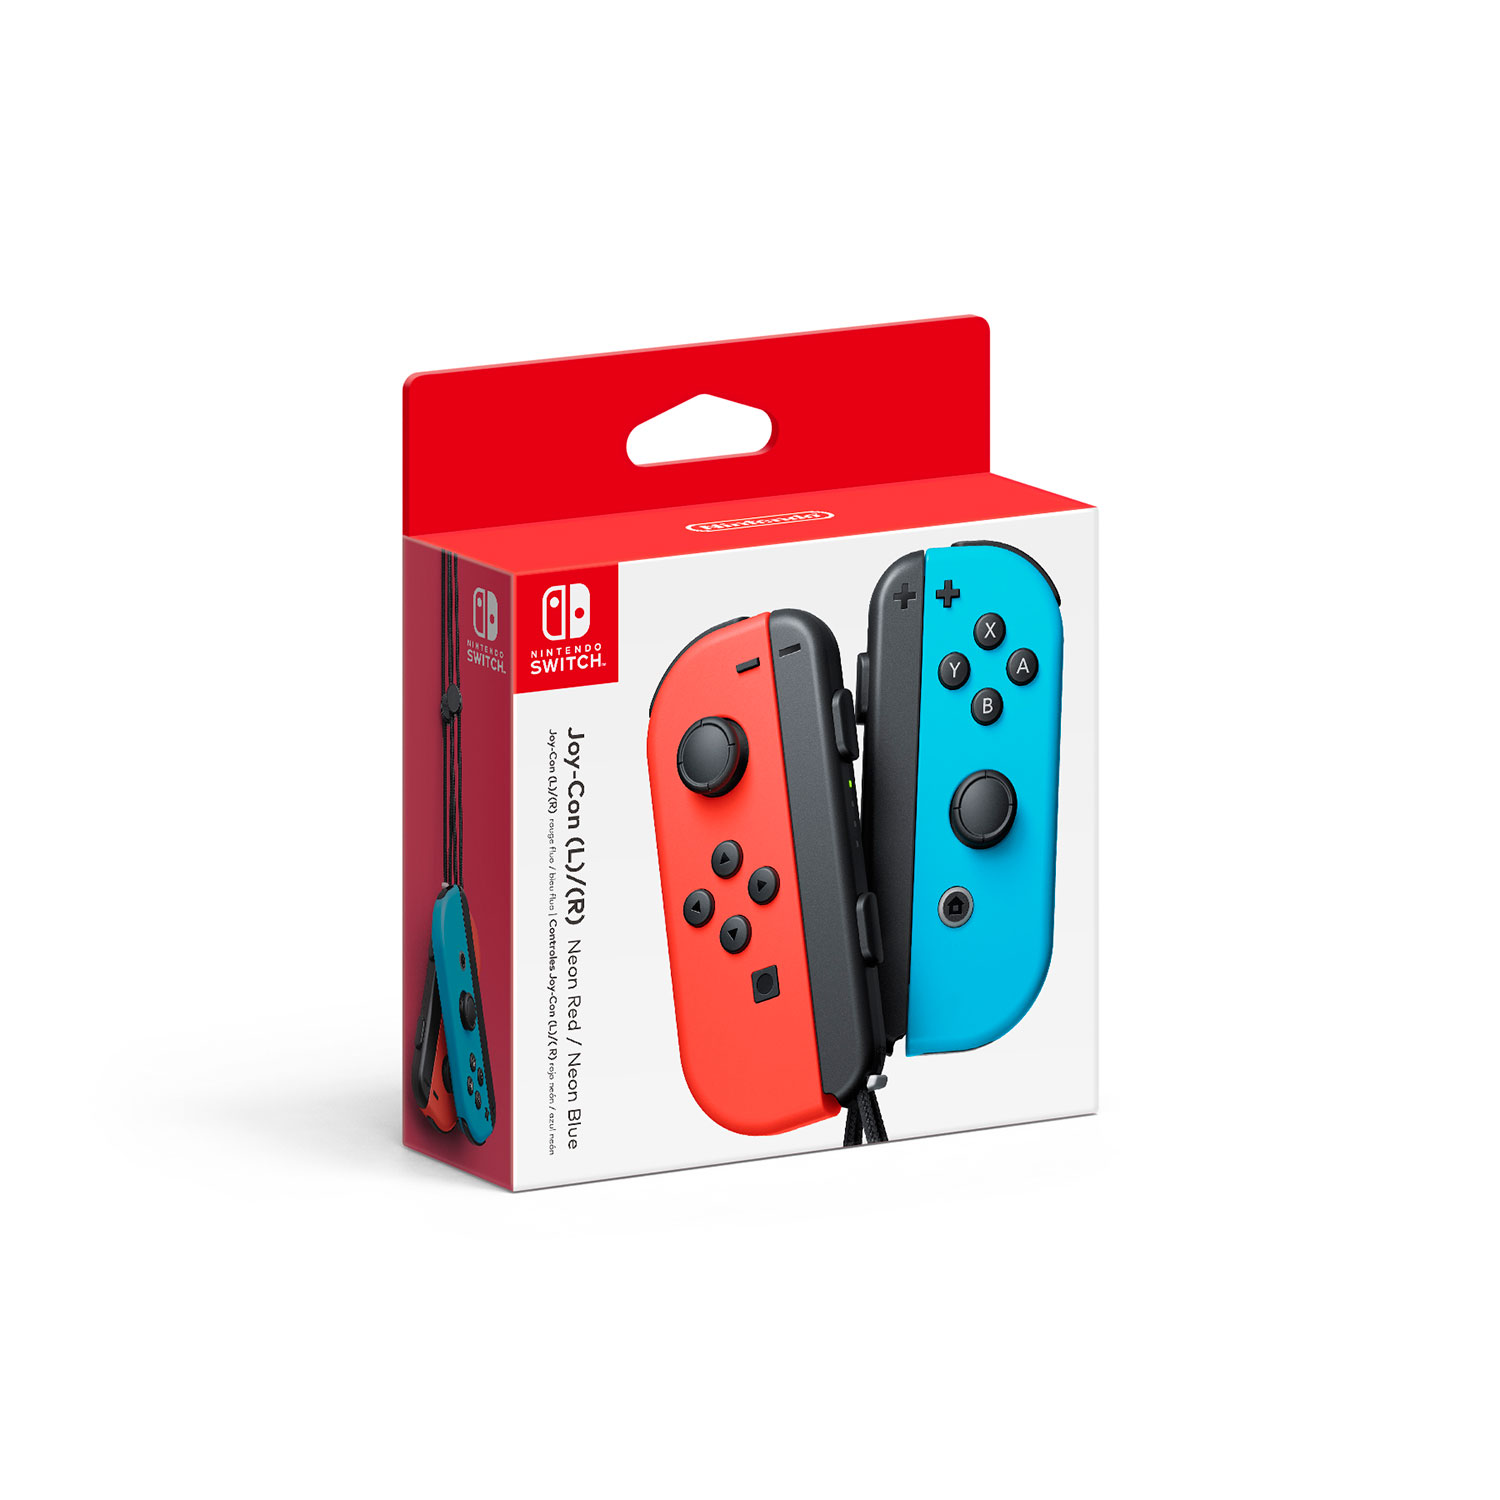 Nintendo Switch Left and Right Joy-Con Controllers - Neon